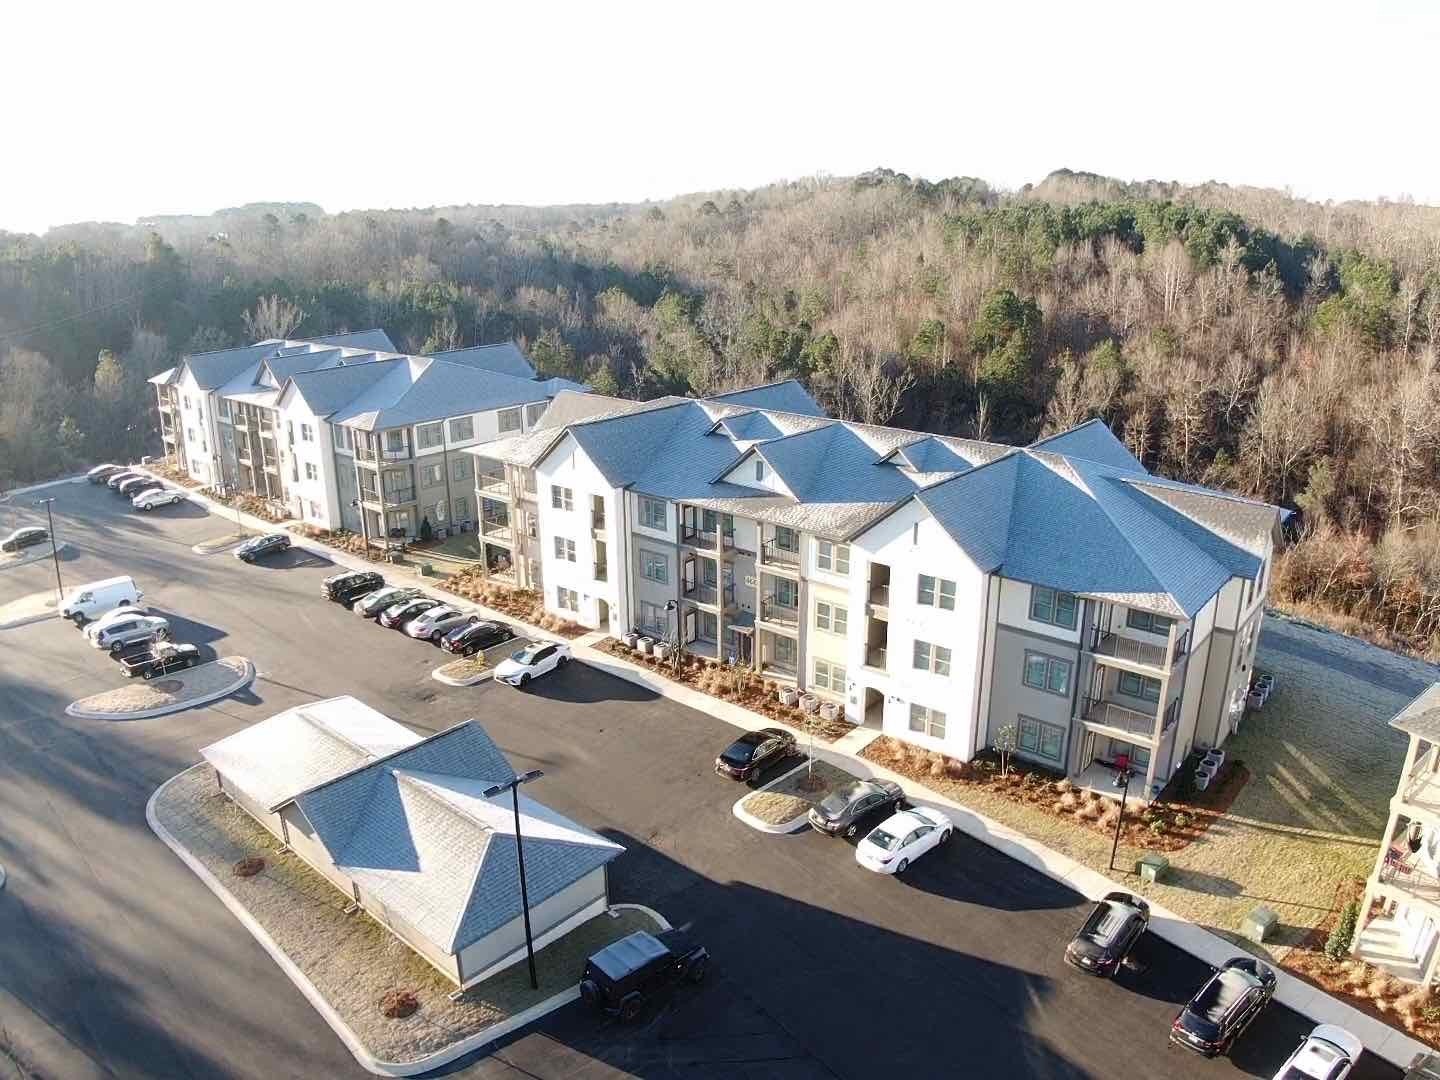 Easterwood apartments exterior view